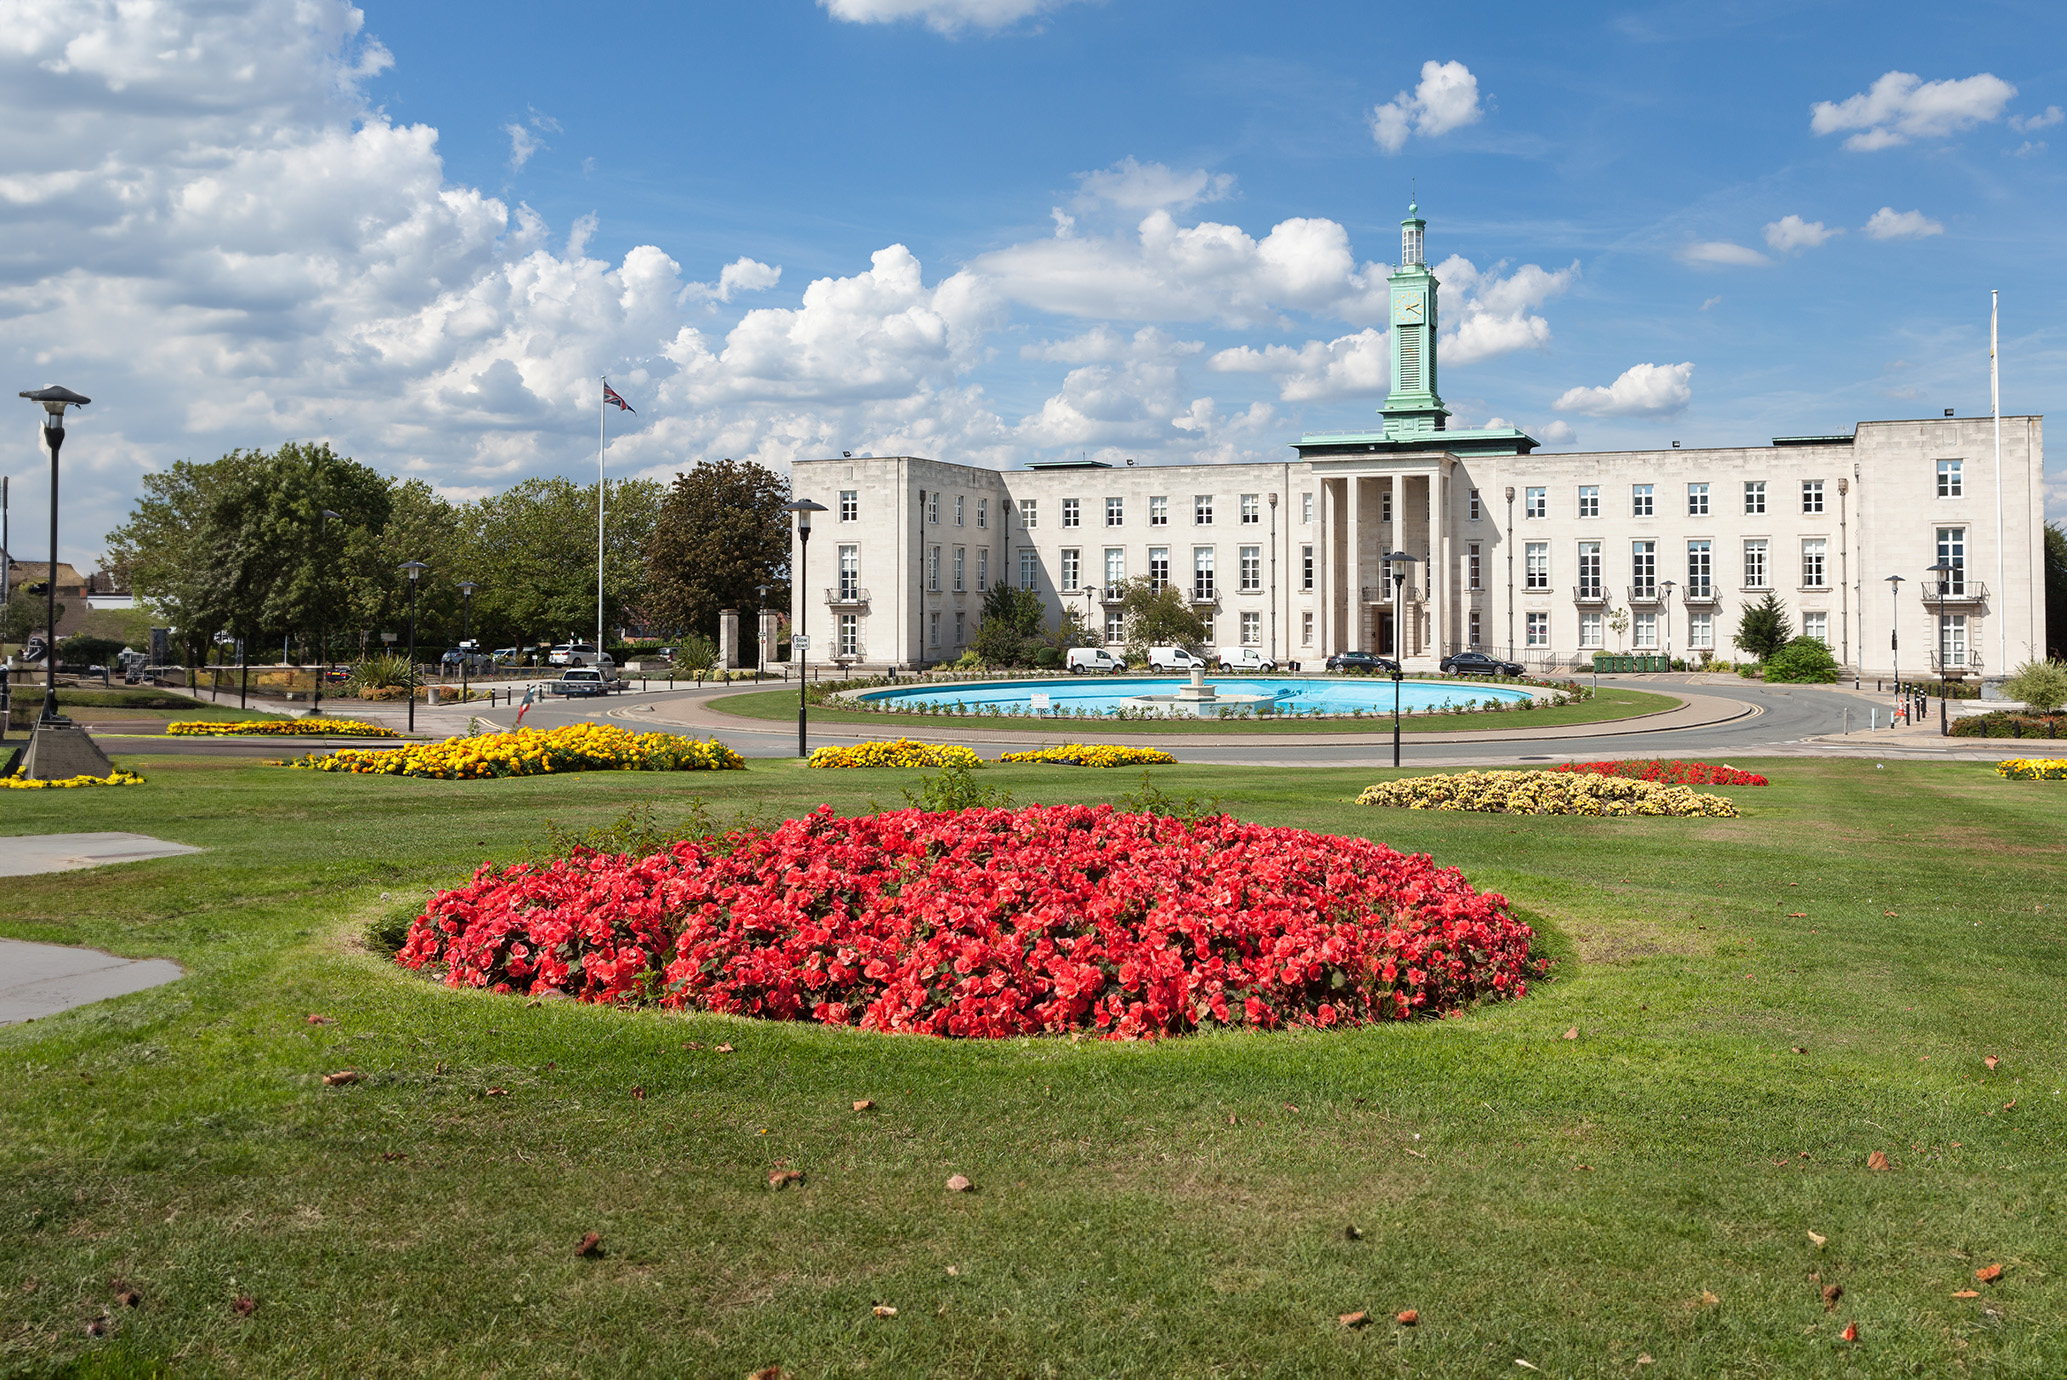 Waltham Forest Council House